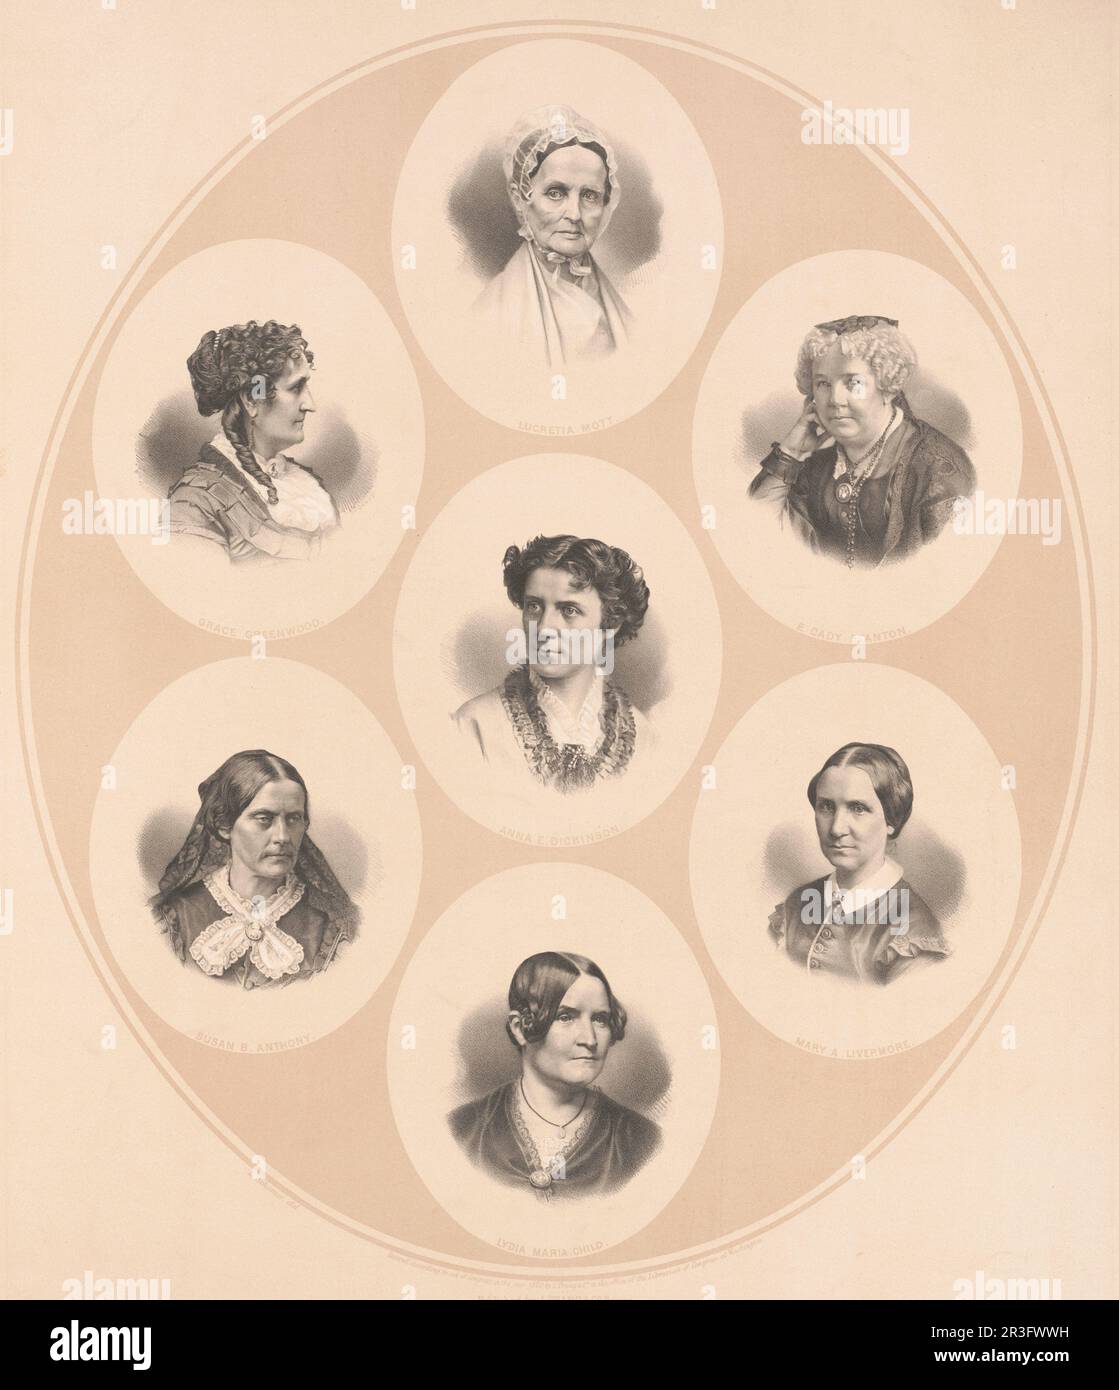 Head-and-shoulders portraits of prominent figures of the suffrage and women's rights movement. Stock Photo